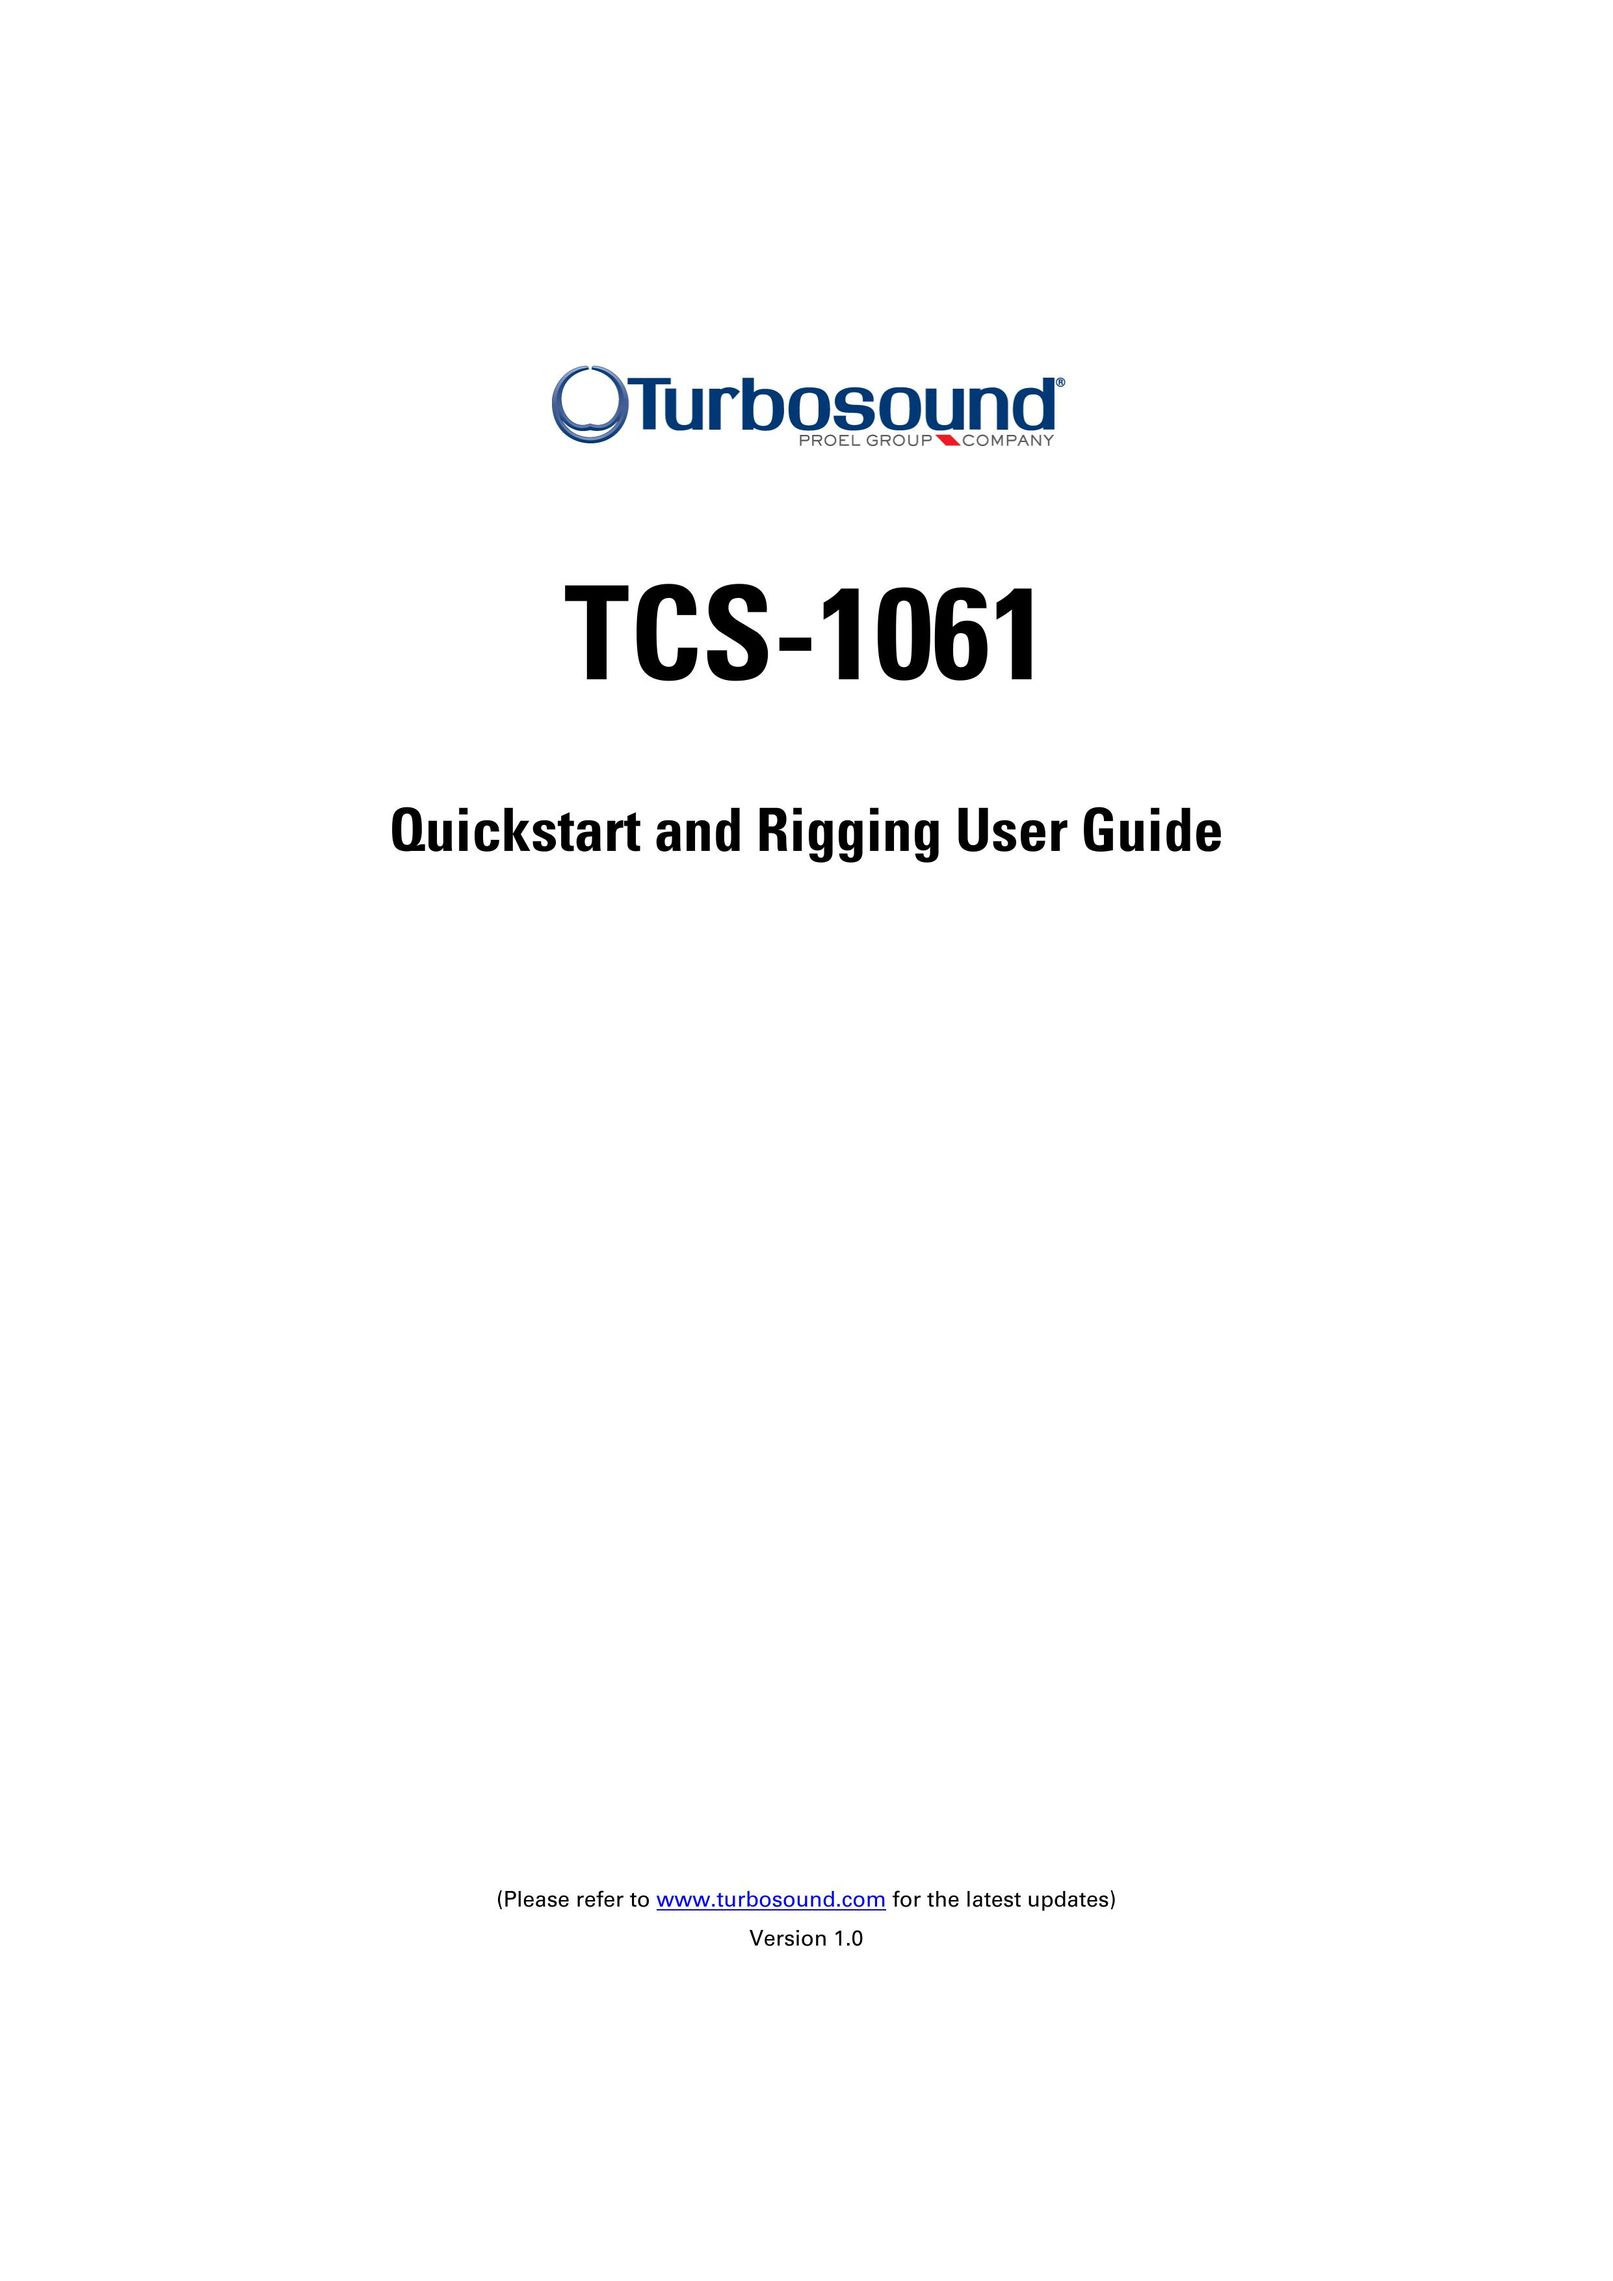 Turbosound TCS-1061 Home Theater System User Manual